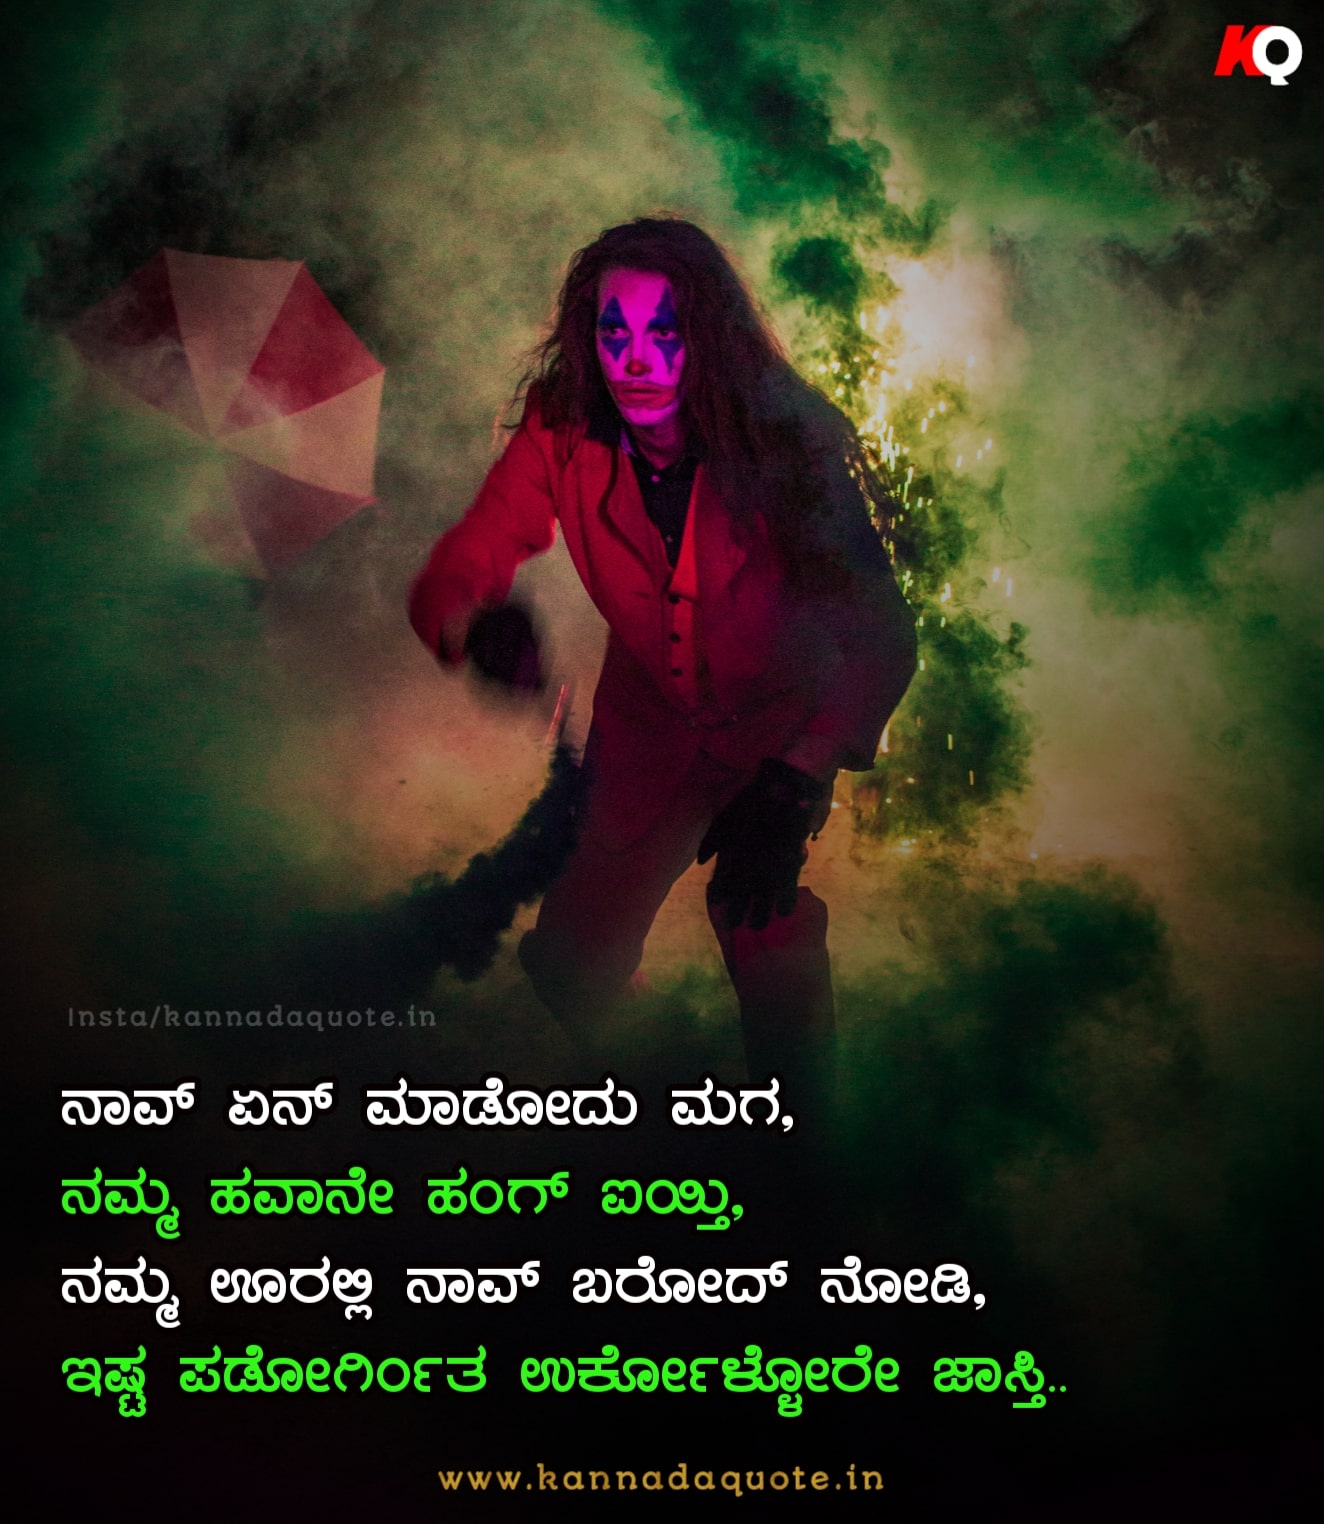 Kannada Attitude Quotes Thought for Instagram Post